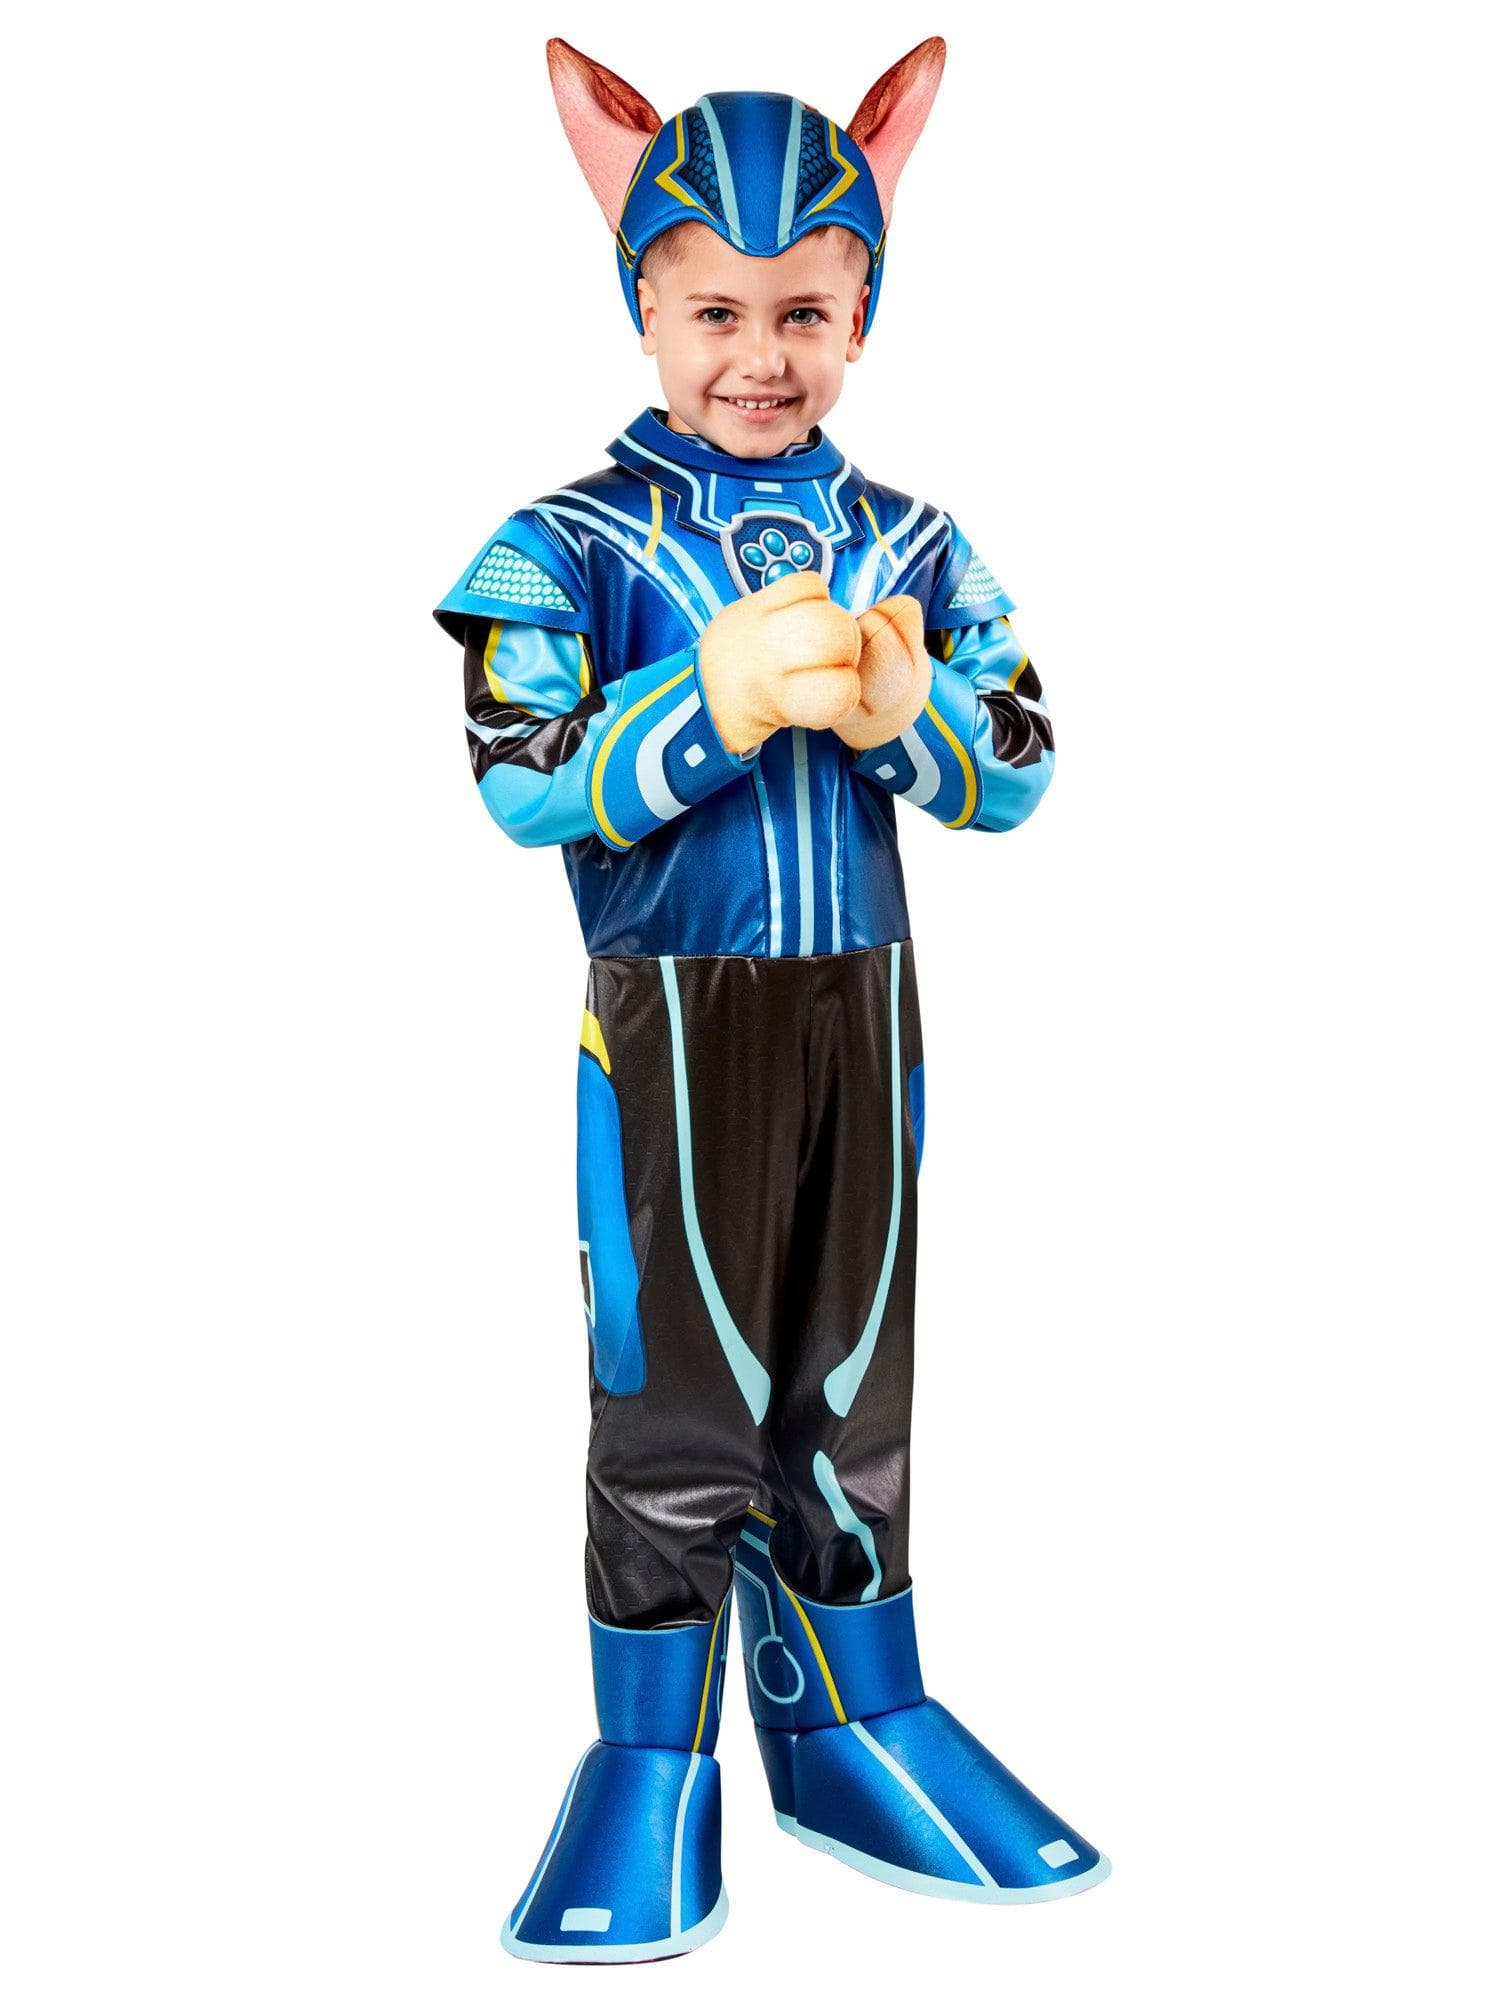 Paw Patrol 2 Mighty Chase Costume for Toddlers - costumes.com